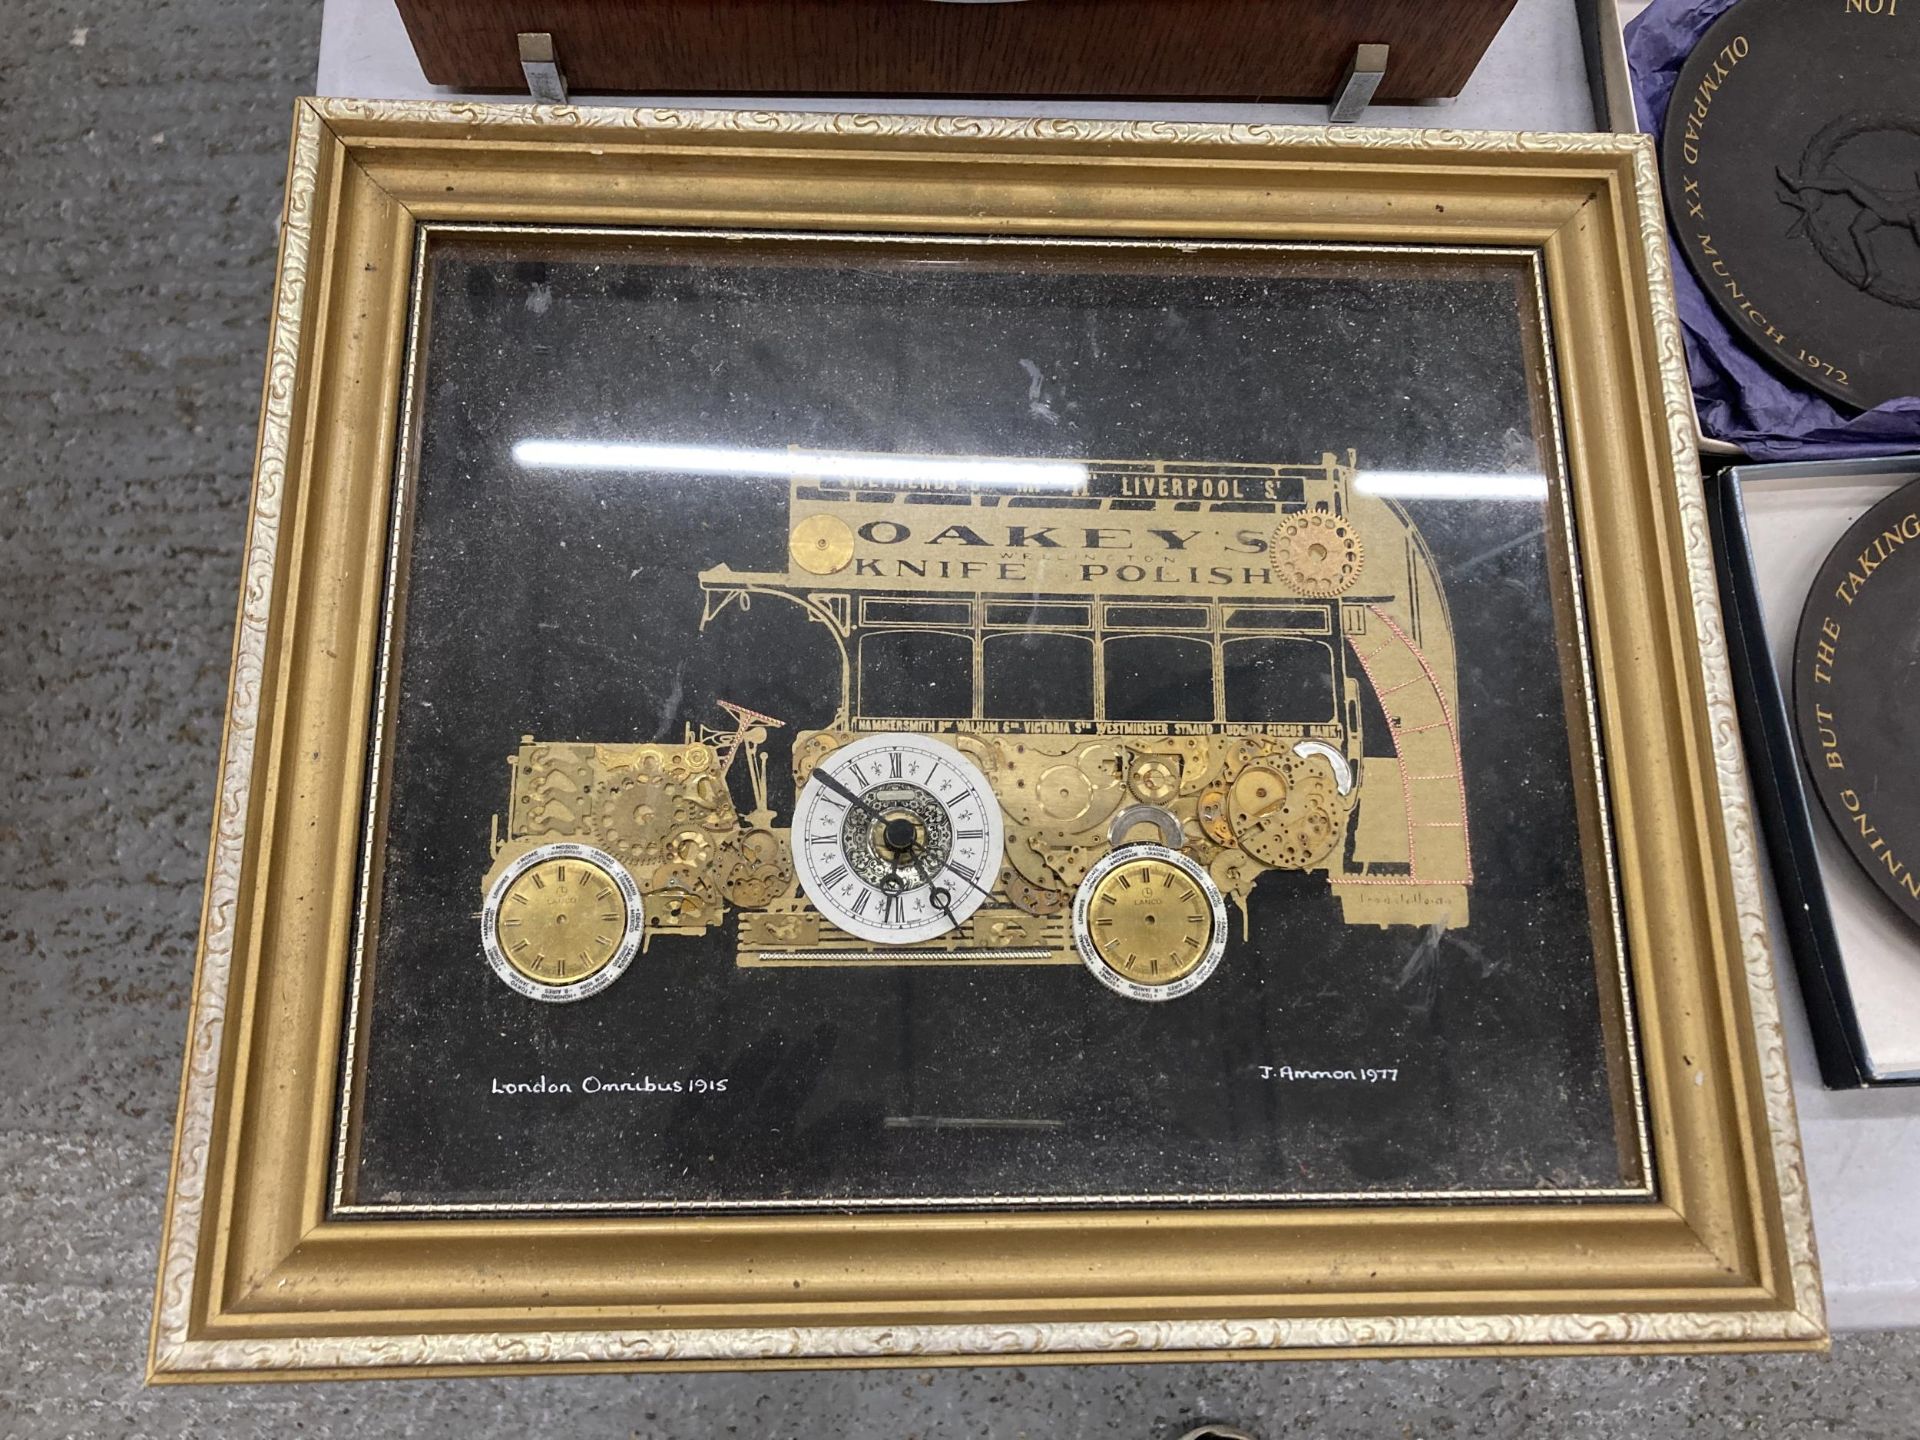 AN IMAGE OF A 1915 LONDON OMNIBUS MADE OUT OF WATCH PARTS